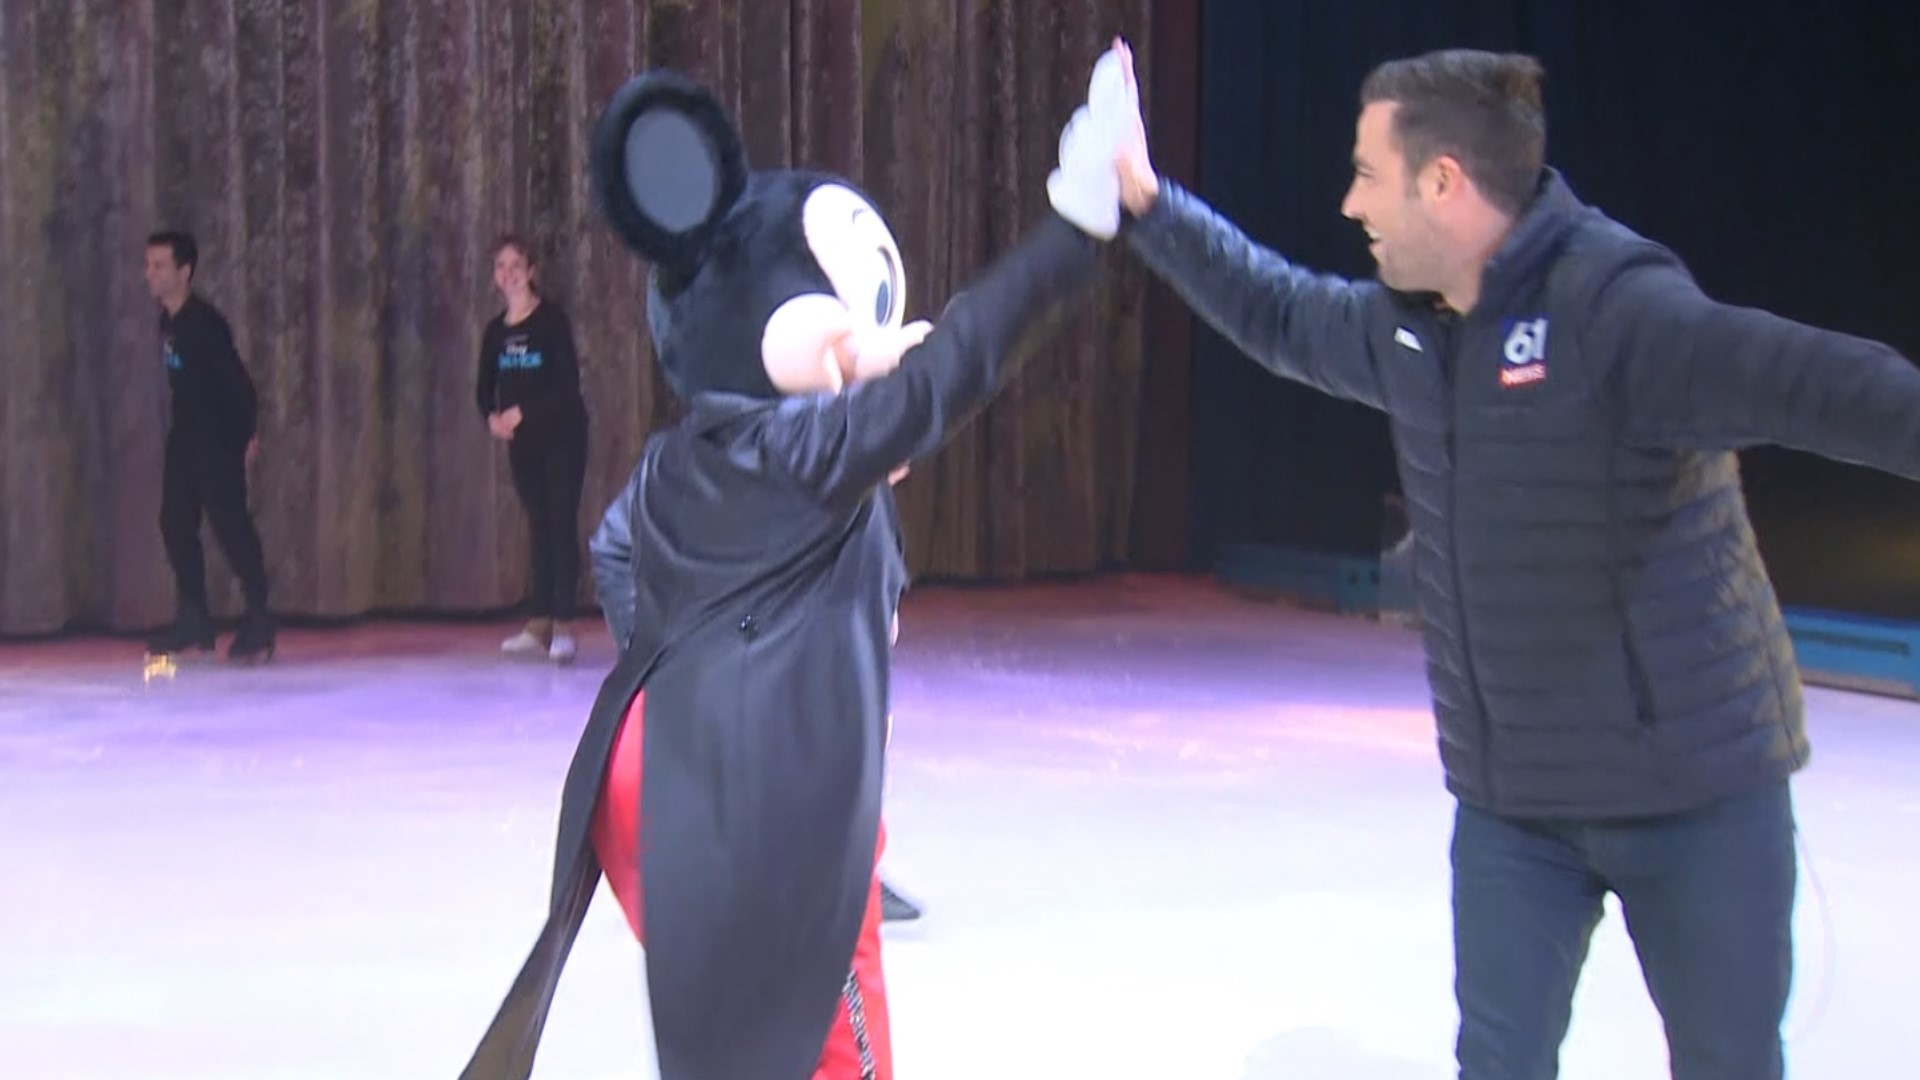 Disney on Ice comes to XL Center in Hartford